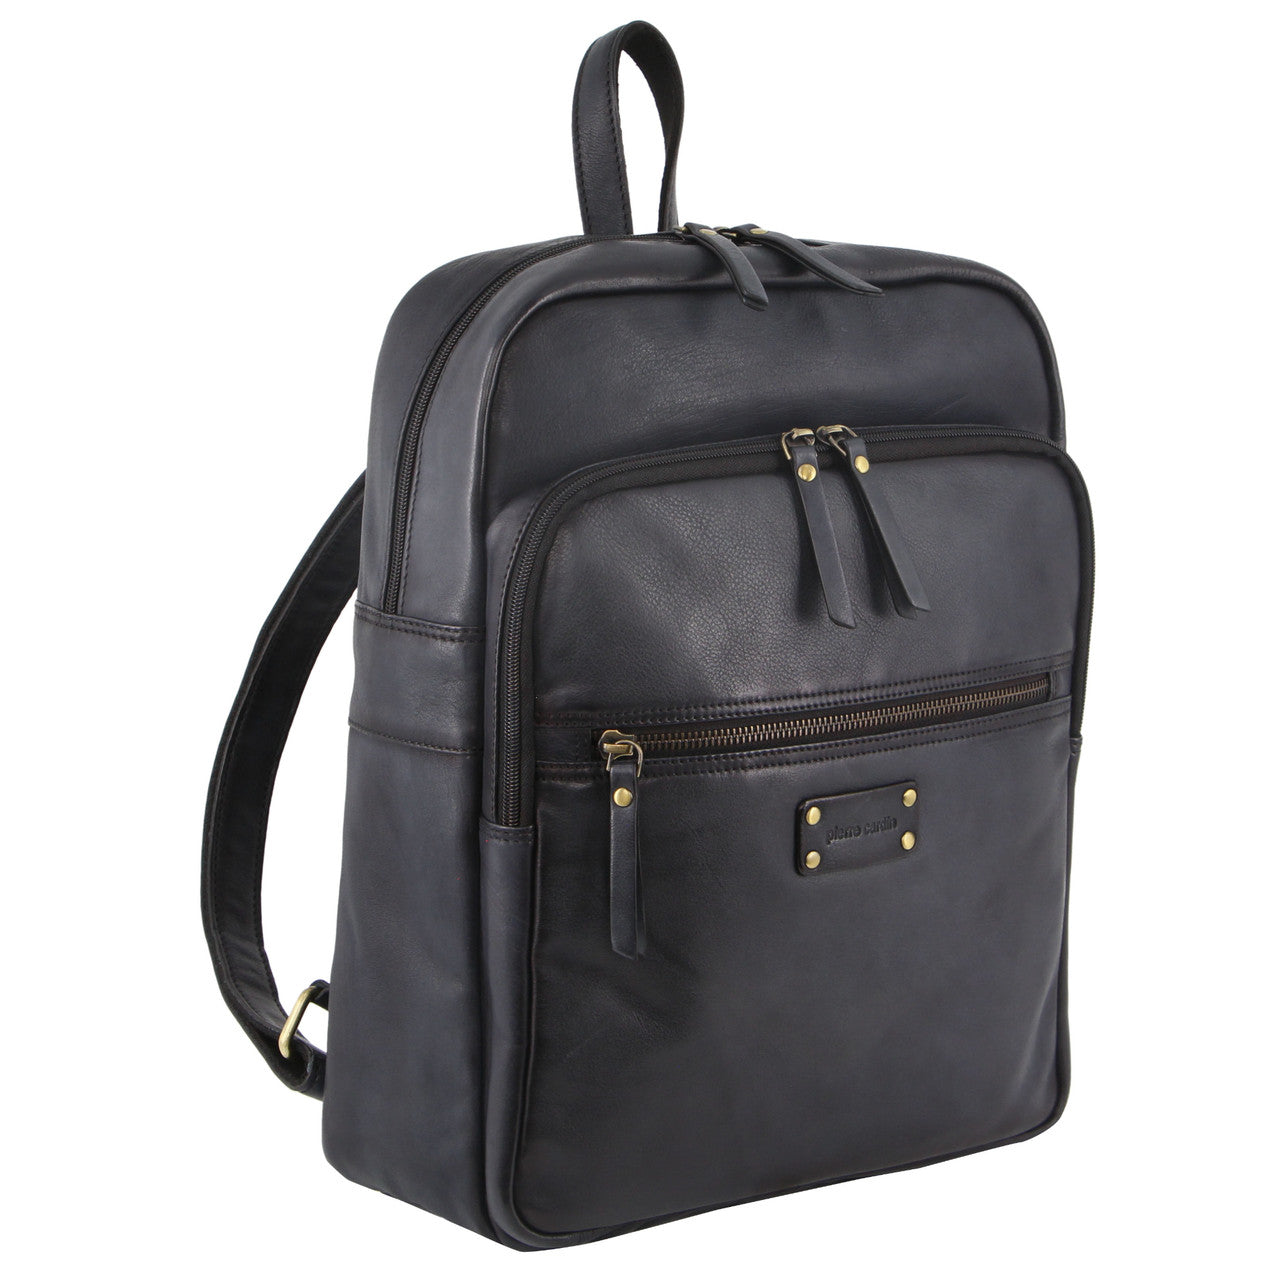 Pierre Cardin Burnished Leather Multi-Compartment Laptop Backpack PC3332 Black-1